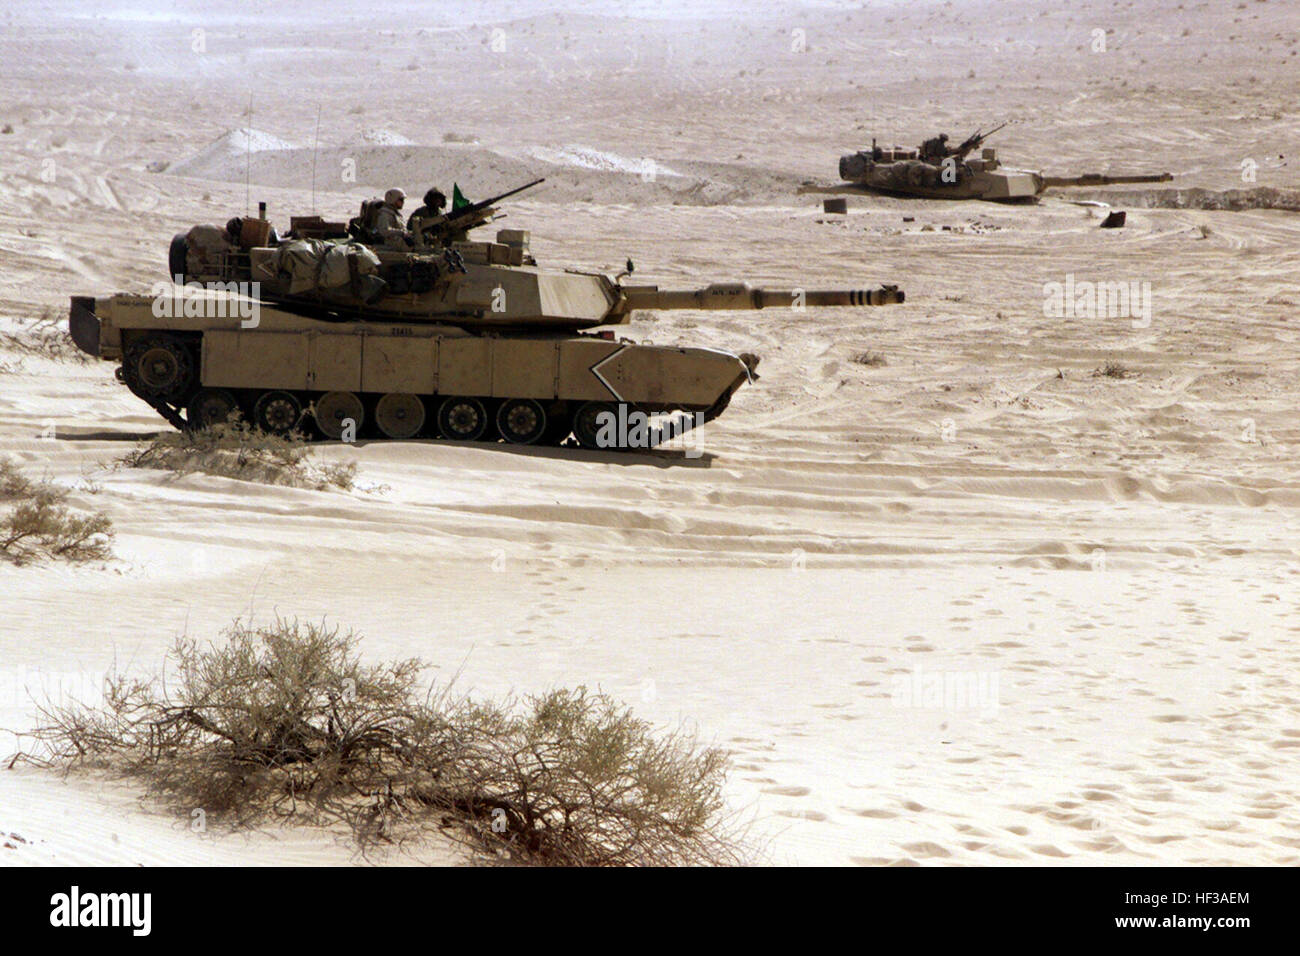 001122-M-6514O-010 Two U.S. Marine Corps M1-A1 Main Battle Tanks sit in defensive positions as they prepare to engage targets on Range 2 of the Al Hamra Training Area in the United Arab Emirates on Nov. 22, 2000.  U.S. Marines from the 13th Marine Expeditionary Unit (Special Operations Capable) are deployed from the USS Tarawa (LHA 1) to the training area for Exercise Iron Magic.  DoD photo by Cpl. Branden P. O'Brien, U.S. Marine Corps. Defense.gov News Photo 001122-M-6514O-010 Stock Photo